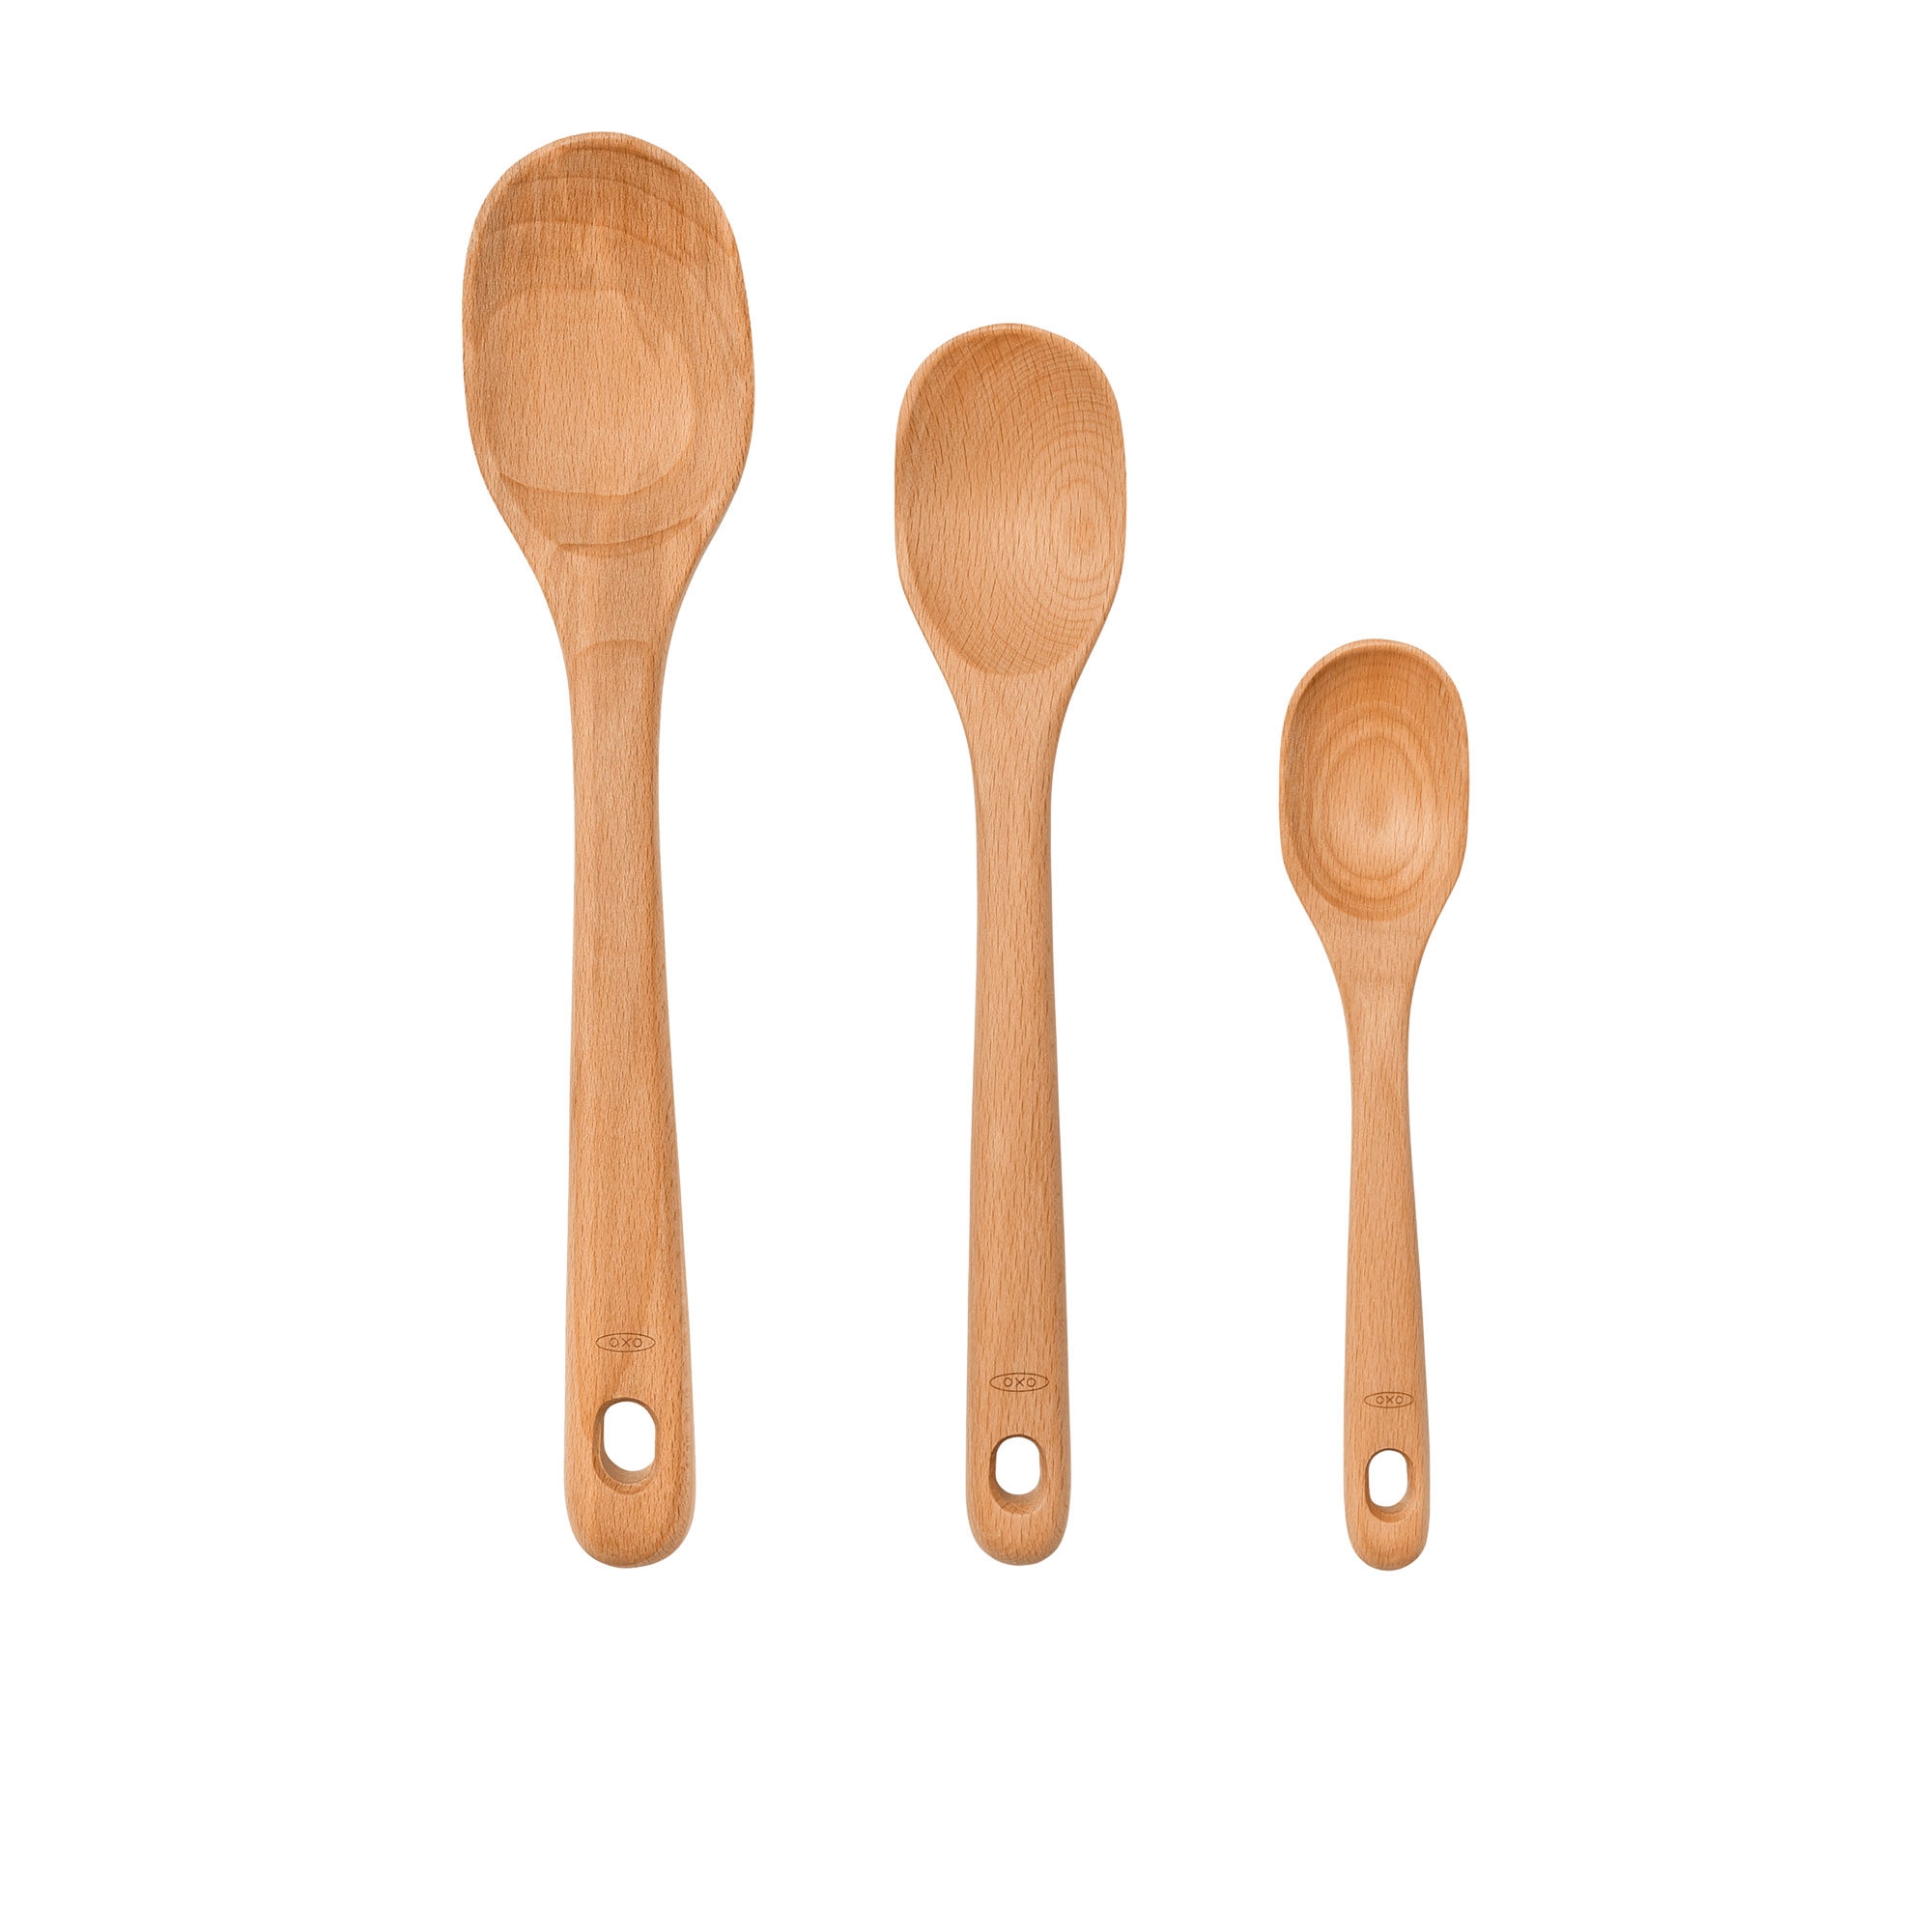 OXO Good Grips Wooden Spoon Set 3pc Image 1